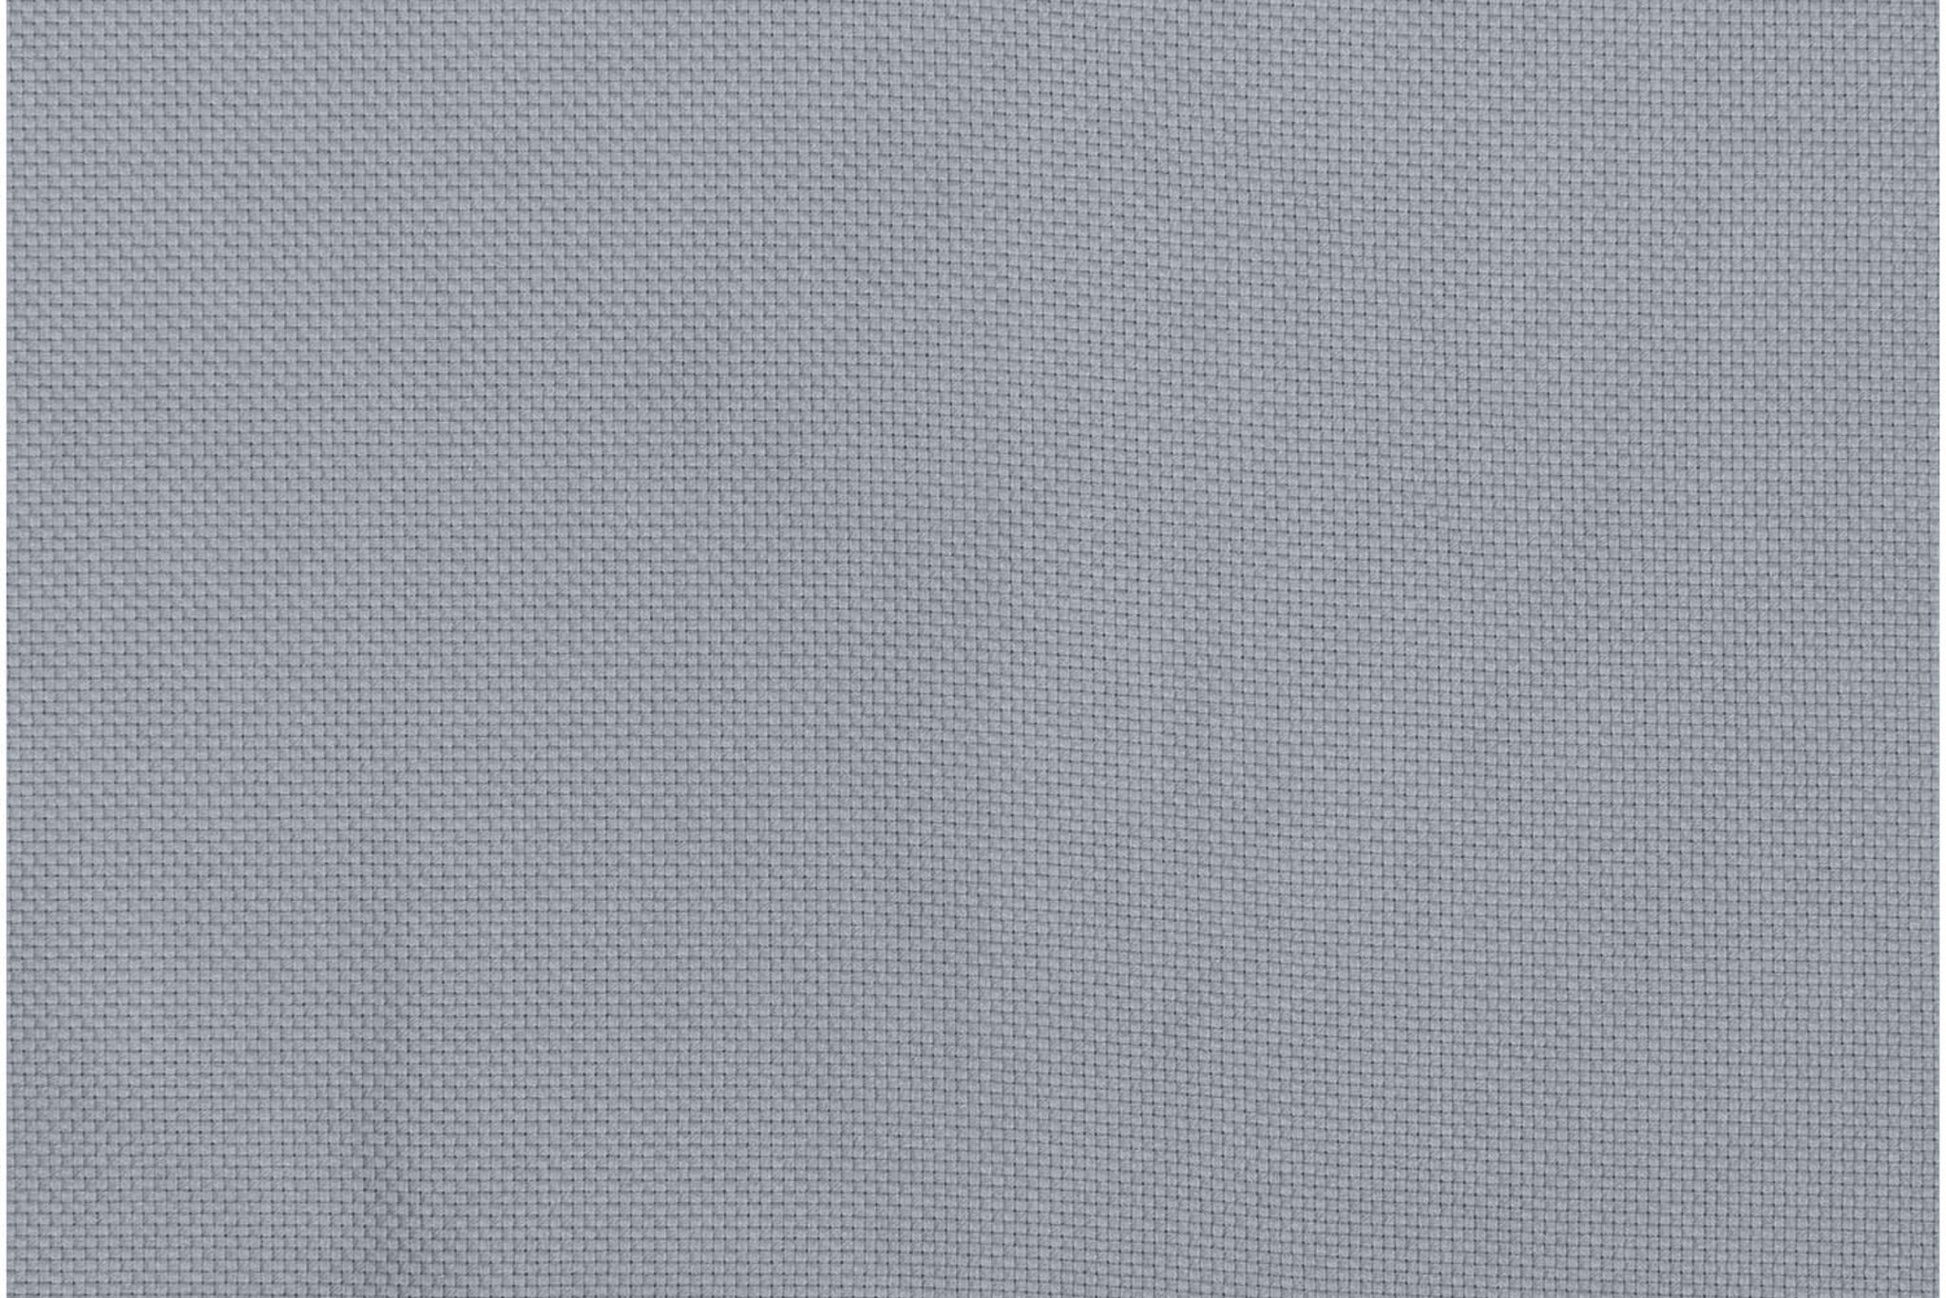 Monks Cloth - Grey - 50 x 140cm - Undercover Otter